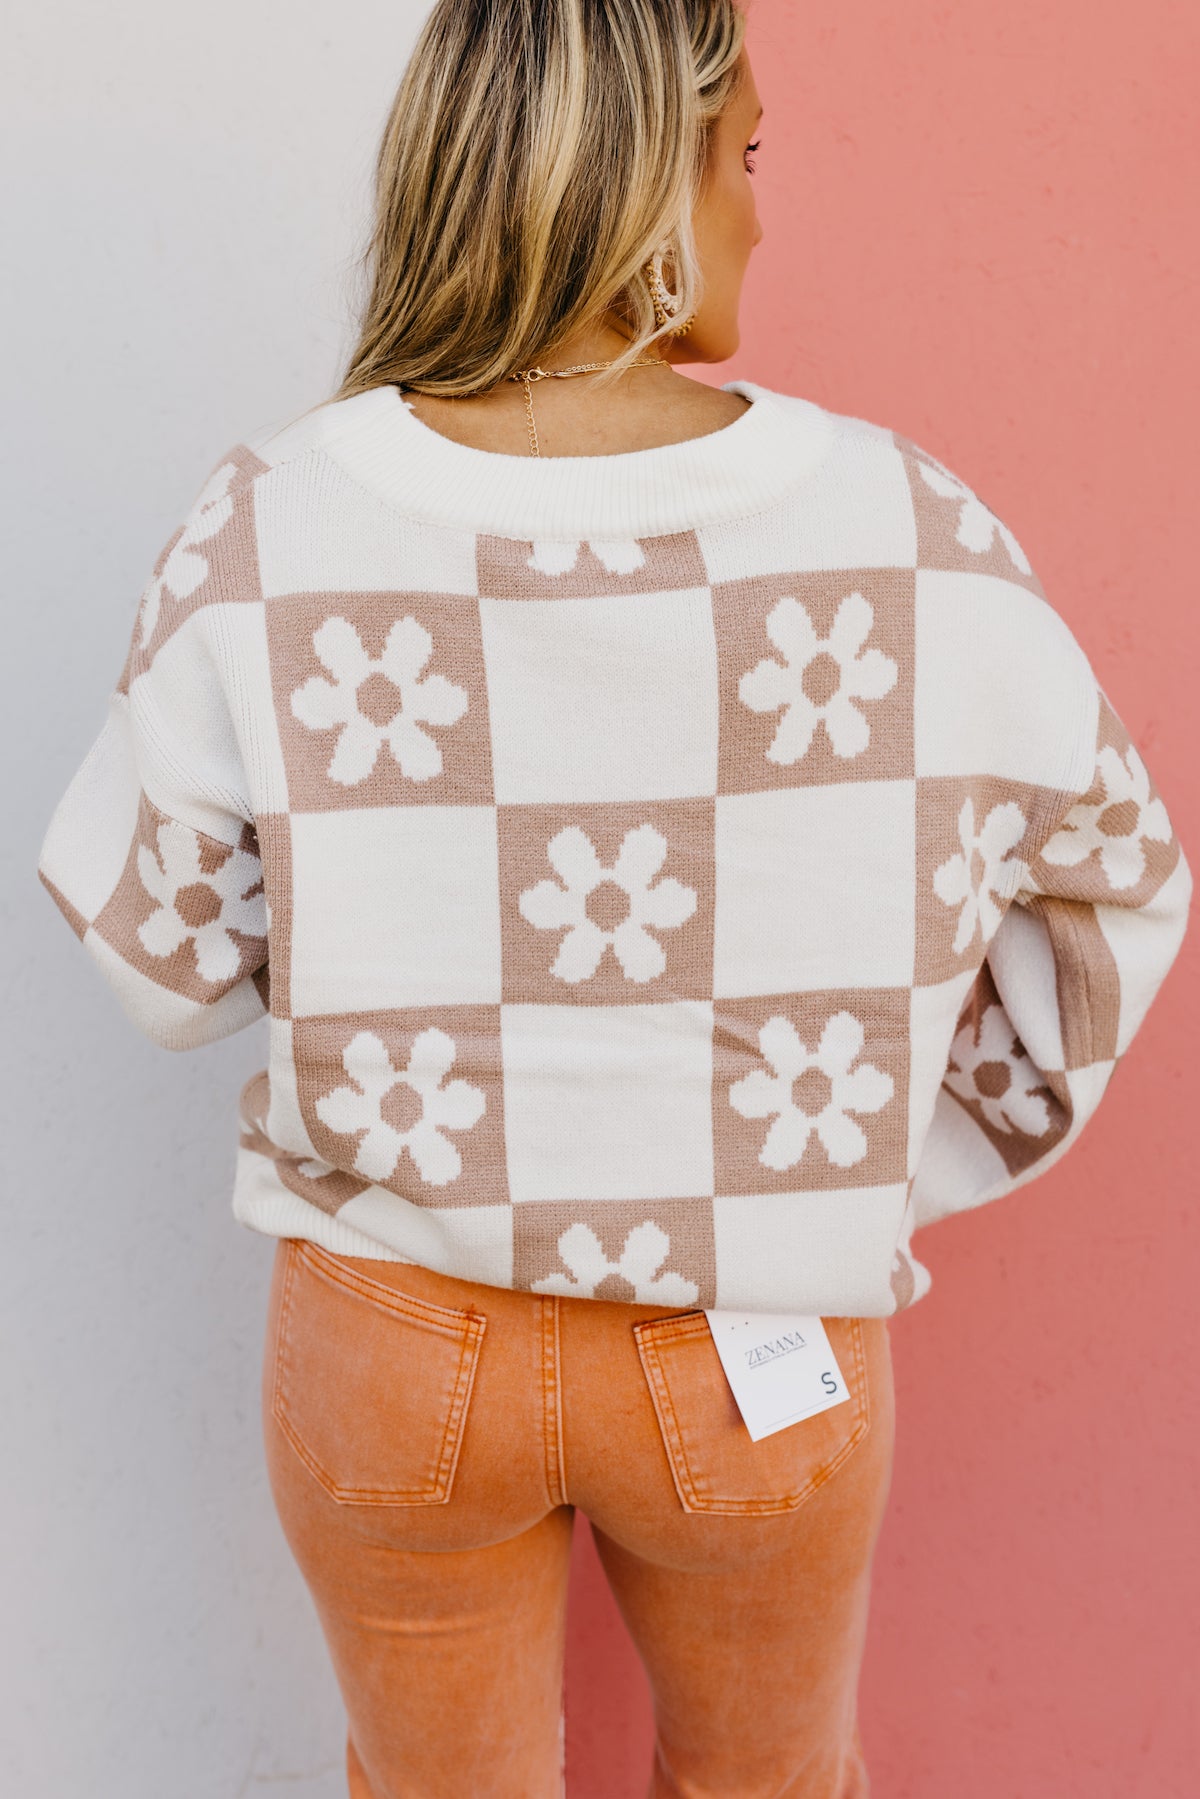 The Leon Floral Checkered Sweater